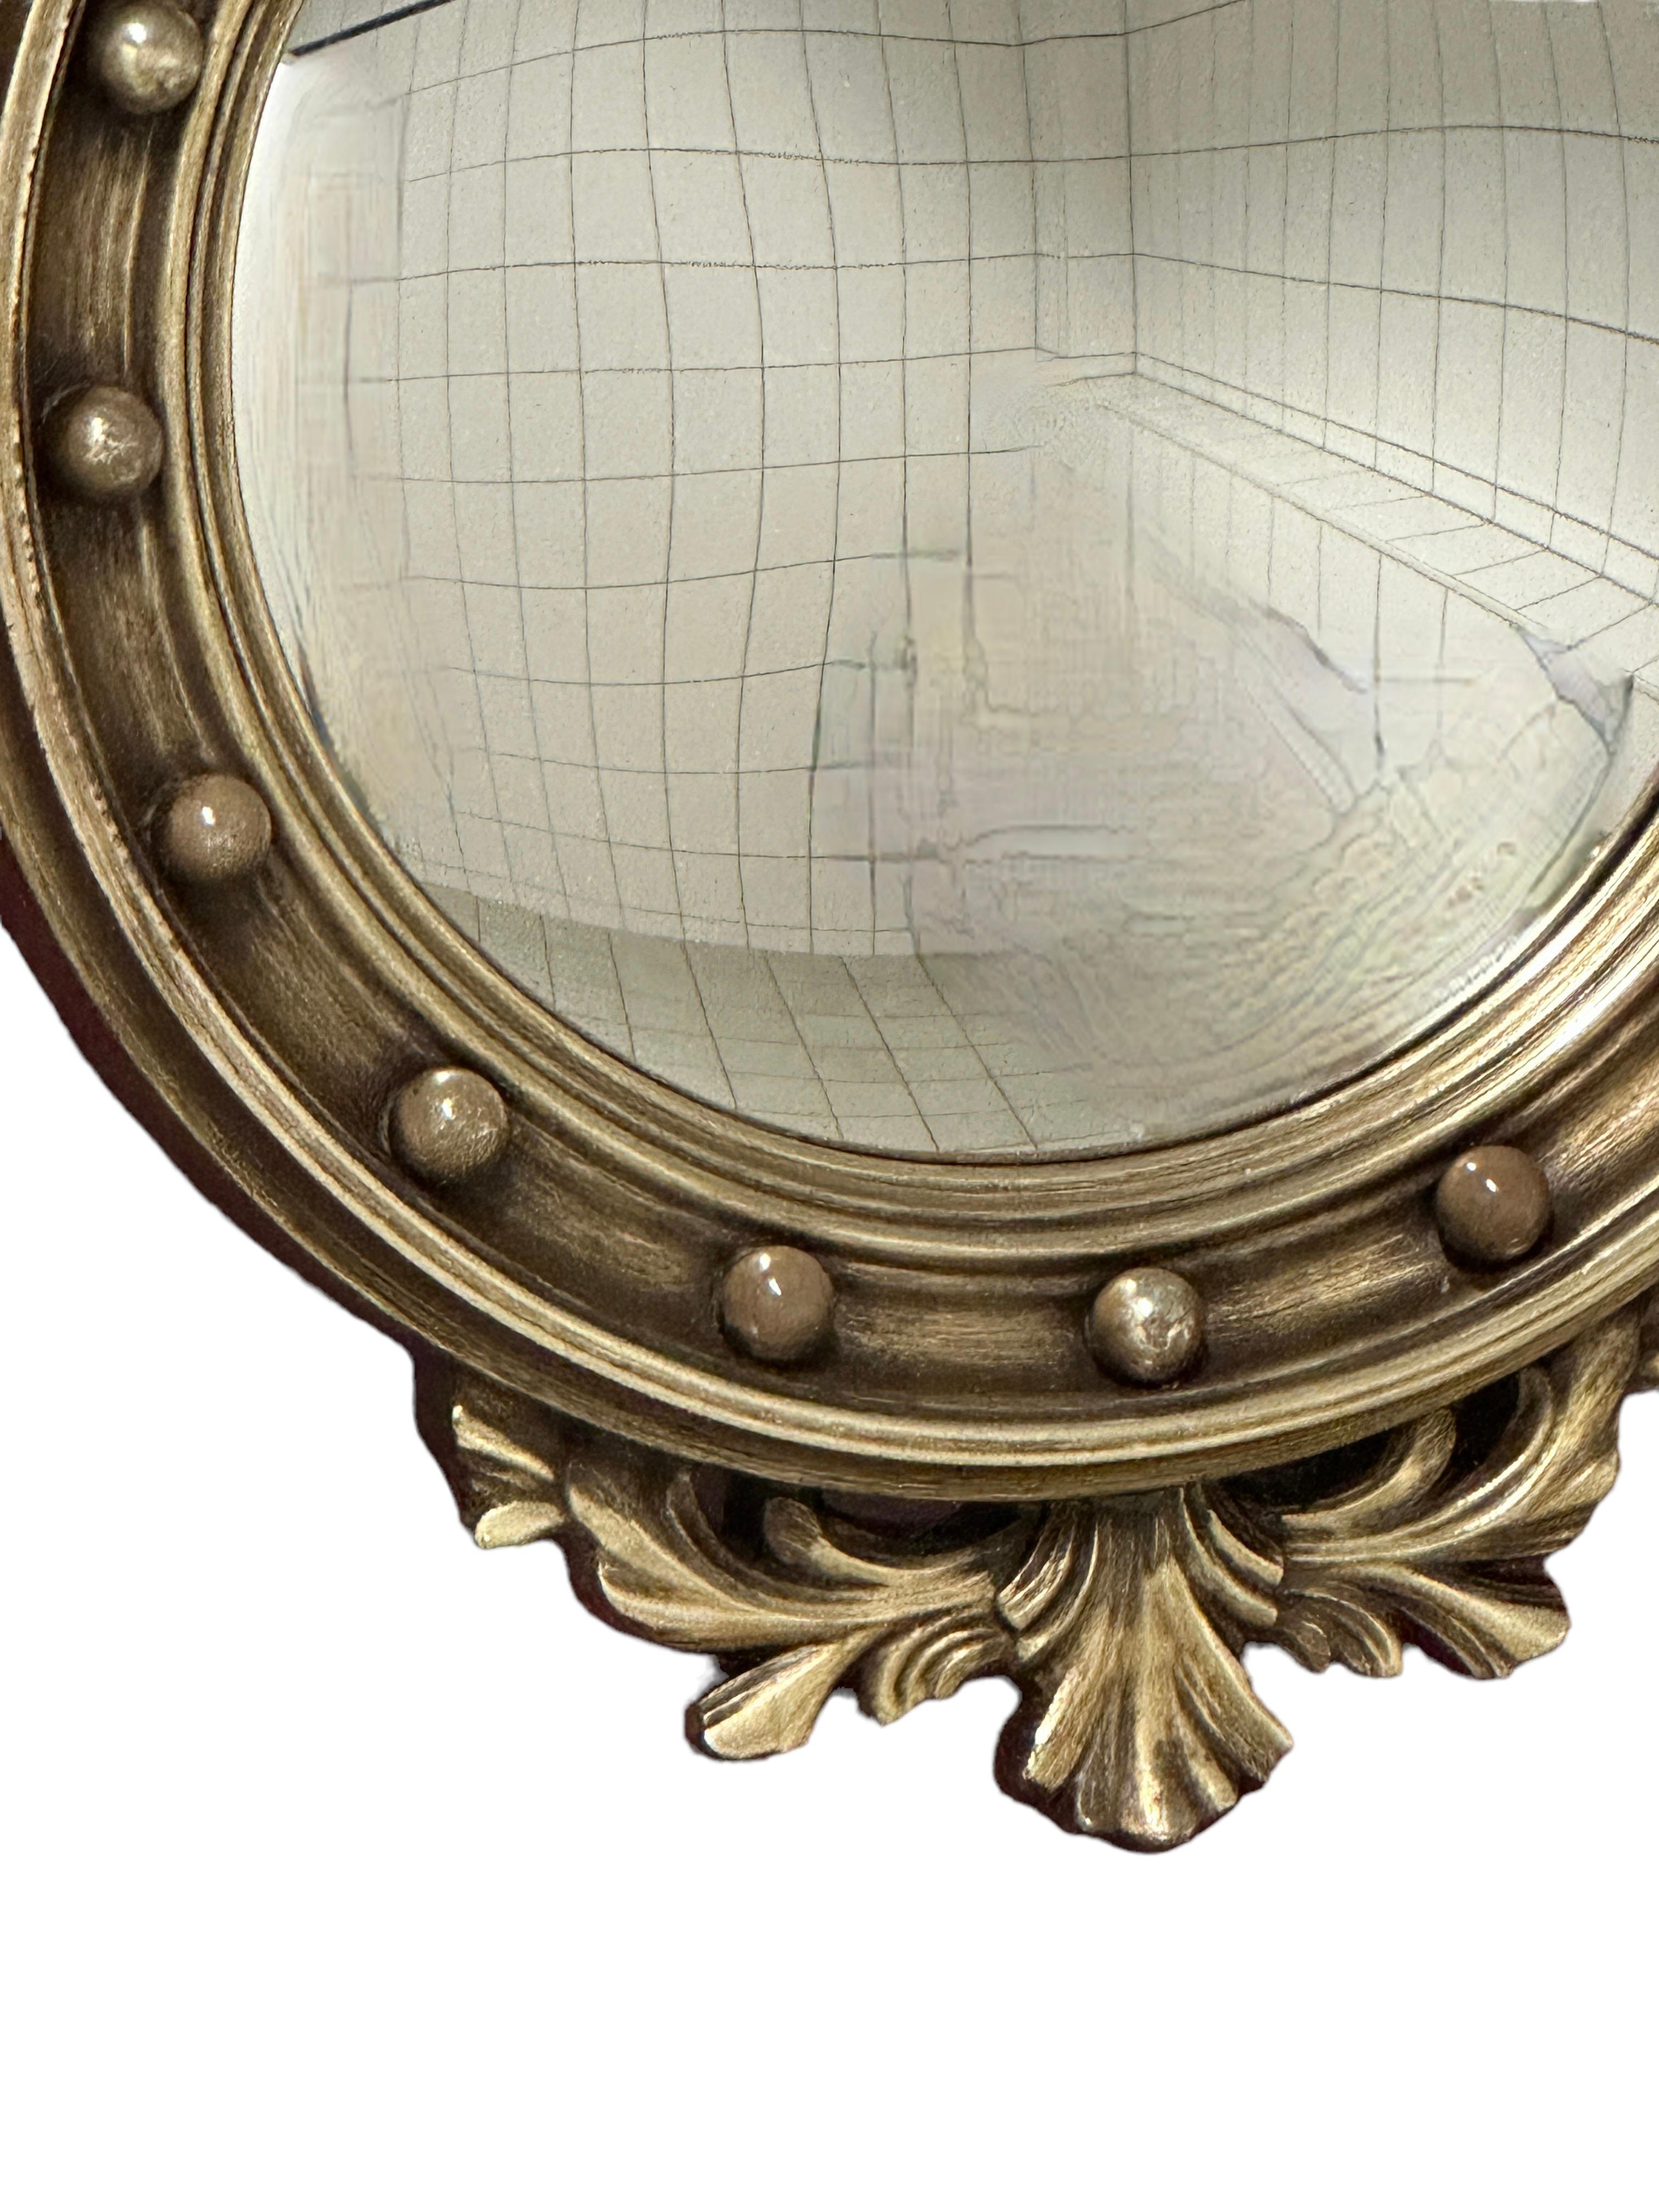 Gilded resin convex mirror with an eagle - sometimes referred to as 'butler' mirror or 'witch eye' mirror.
The golden mirror is in a very good condition. Beautiful eye catching mirror, ideal to add to a collection of sunburst mirrors. Mirror itself